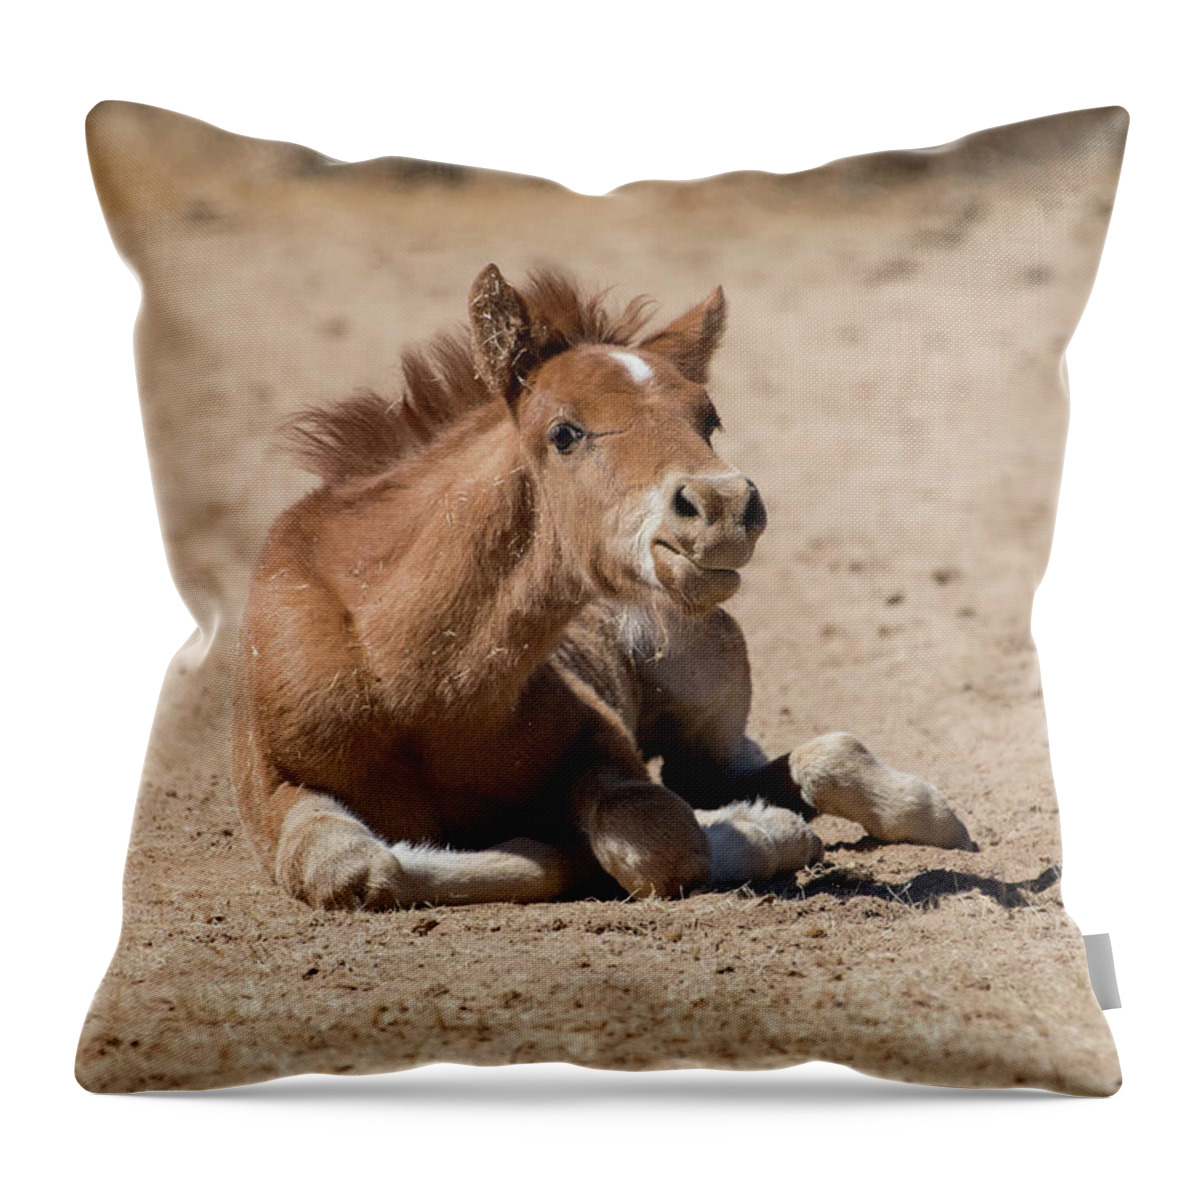 Horse Throw Pillow featuring the photograph Nap Time's Over by Lisa Manifold